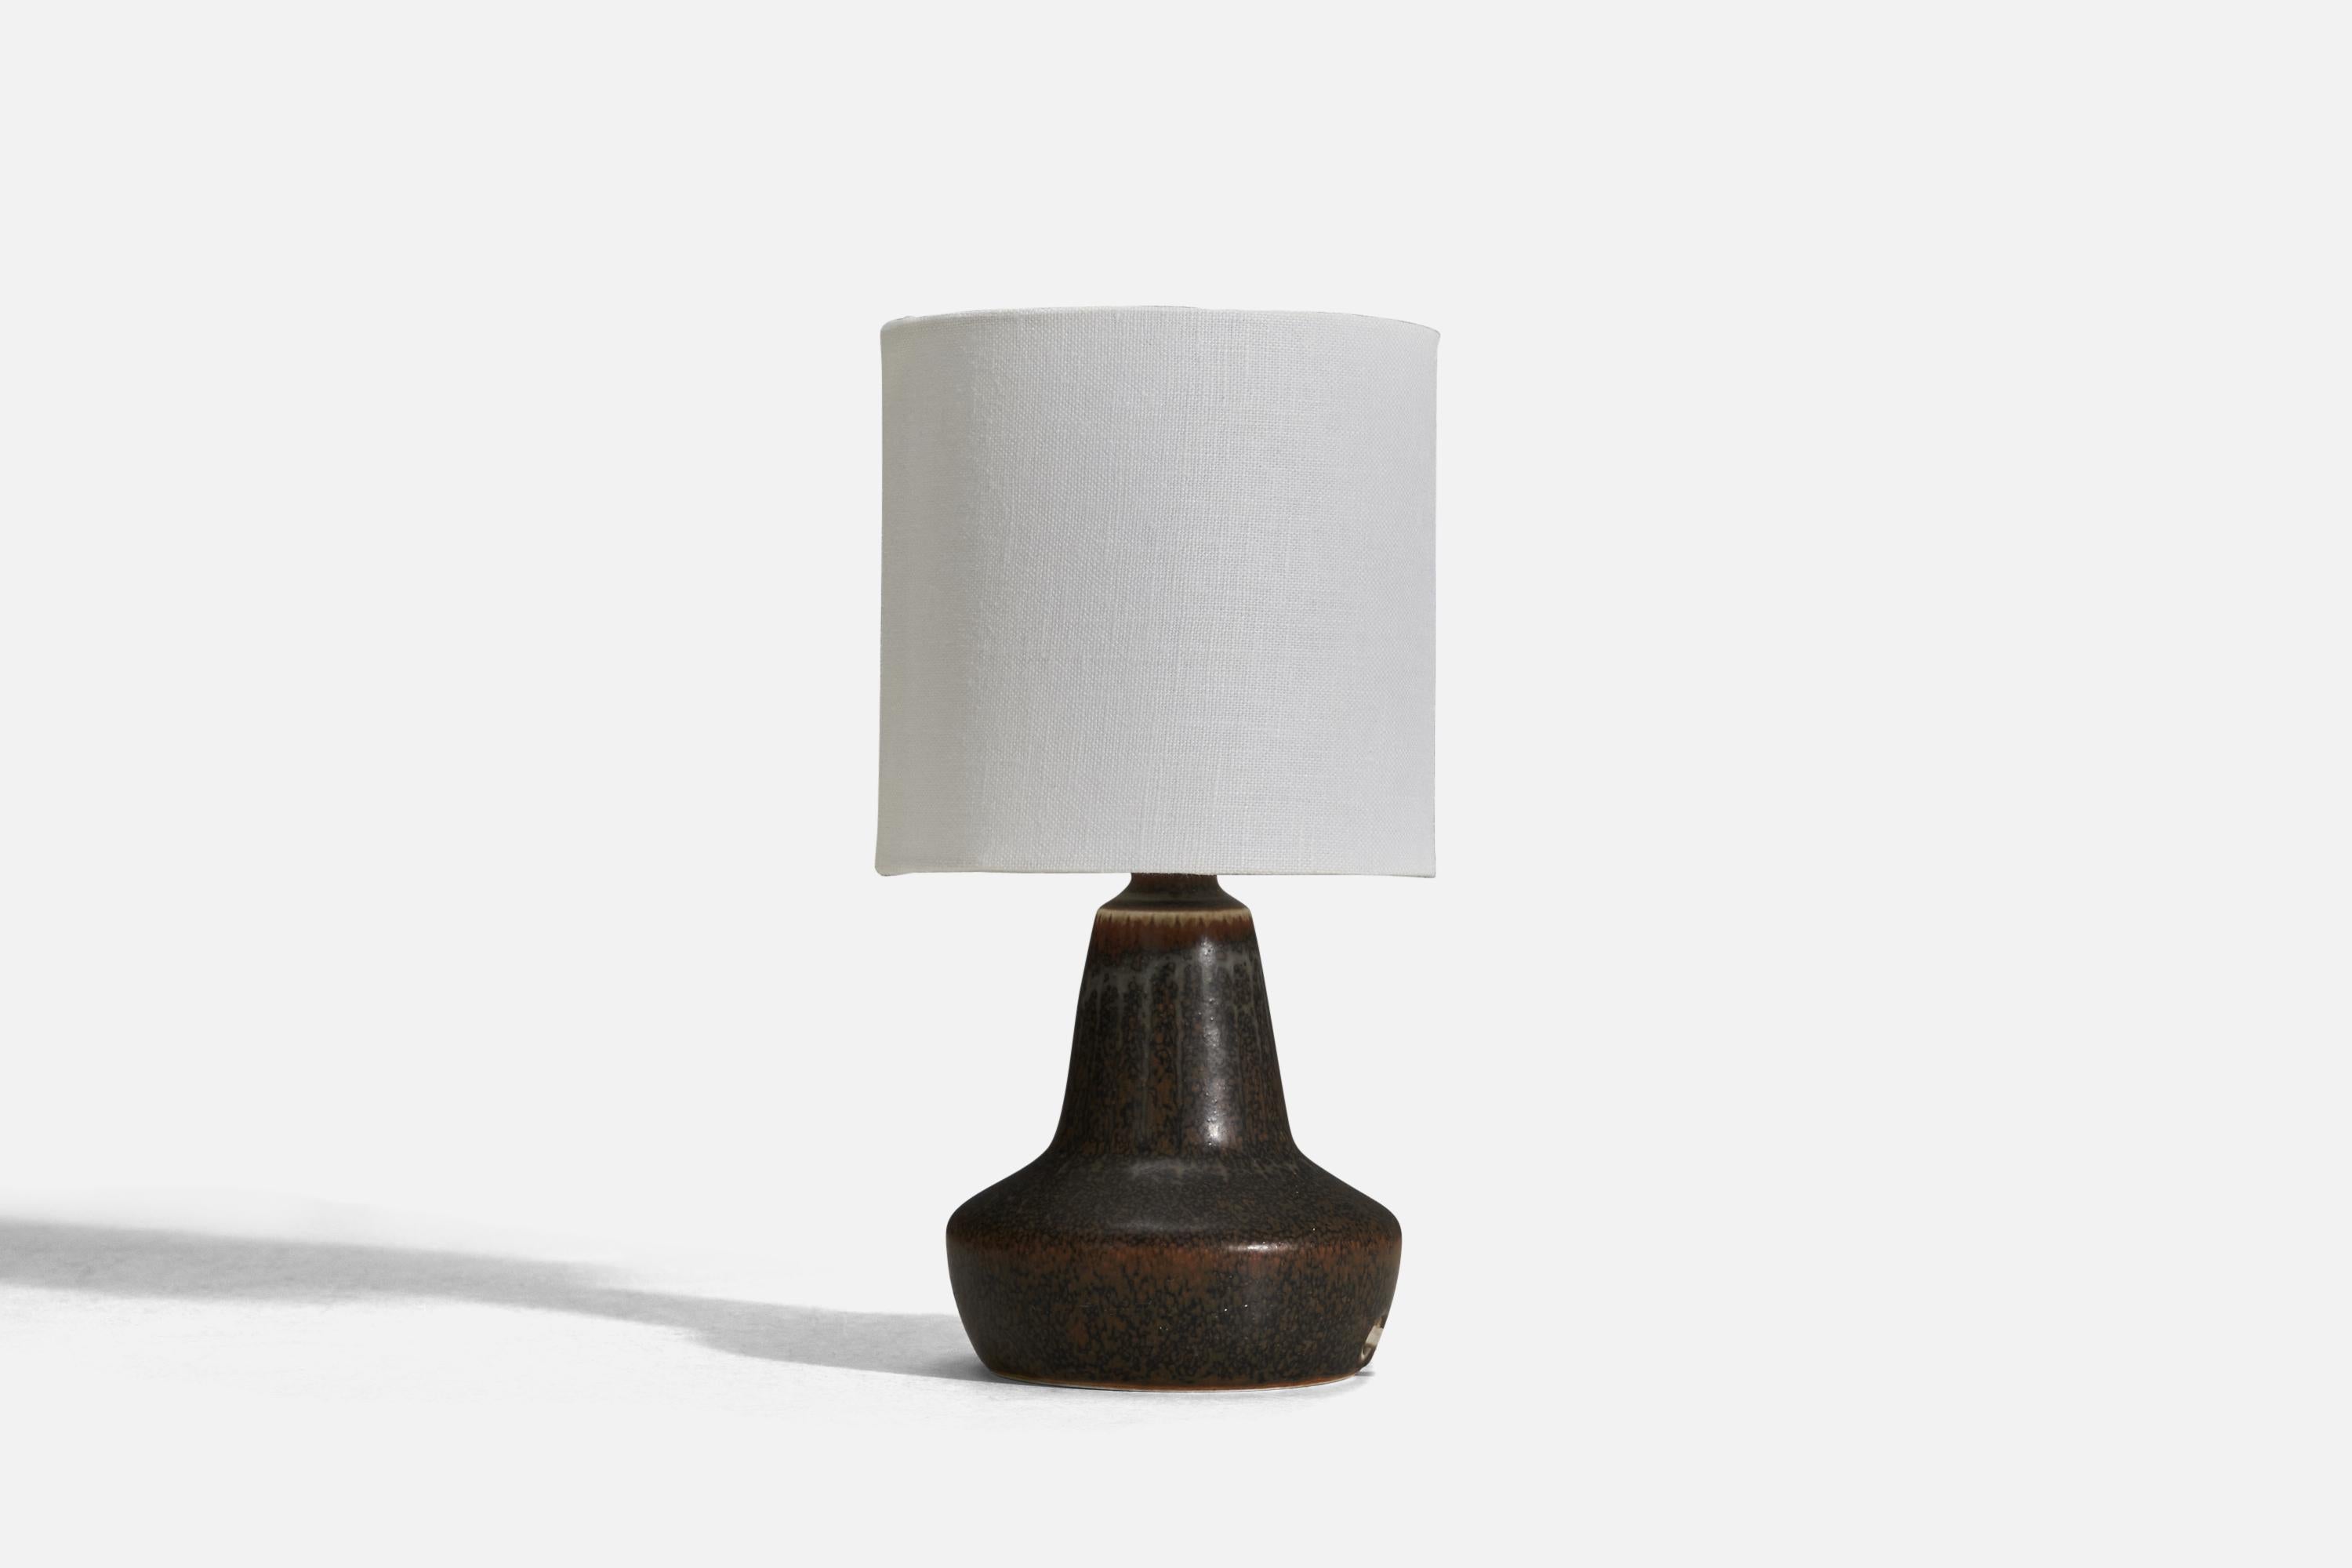 A pair of brown glazed stoneware table lamps designed by Gunnar Nylund and produced by Rörstrand, Sweden, 1950s.

Sold without Lampshade
Dimensions of lamp (inches) : 6.87 x 4.18 x 4.18 (height x width x depth)
Dimensions of lampshade (inches) :